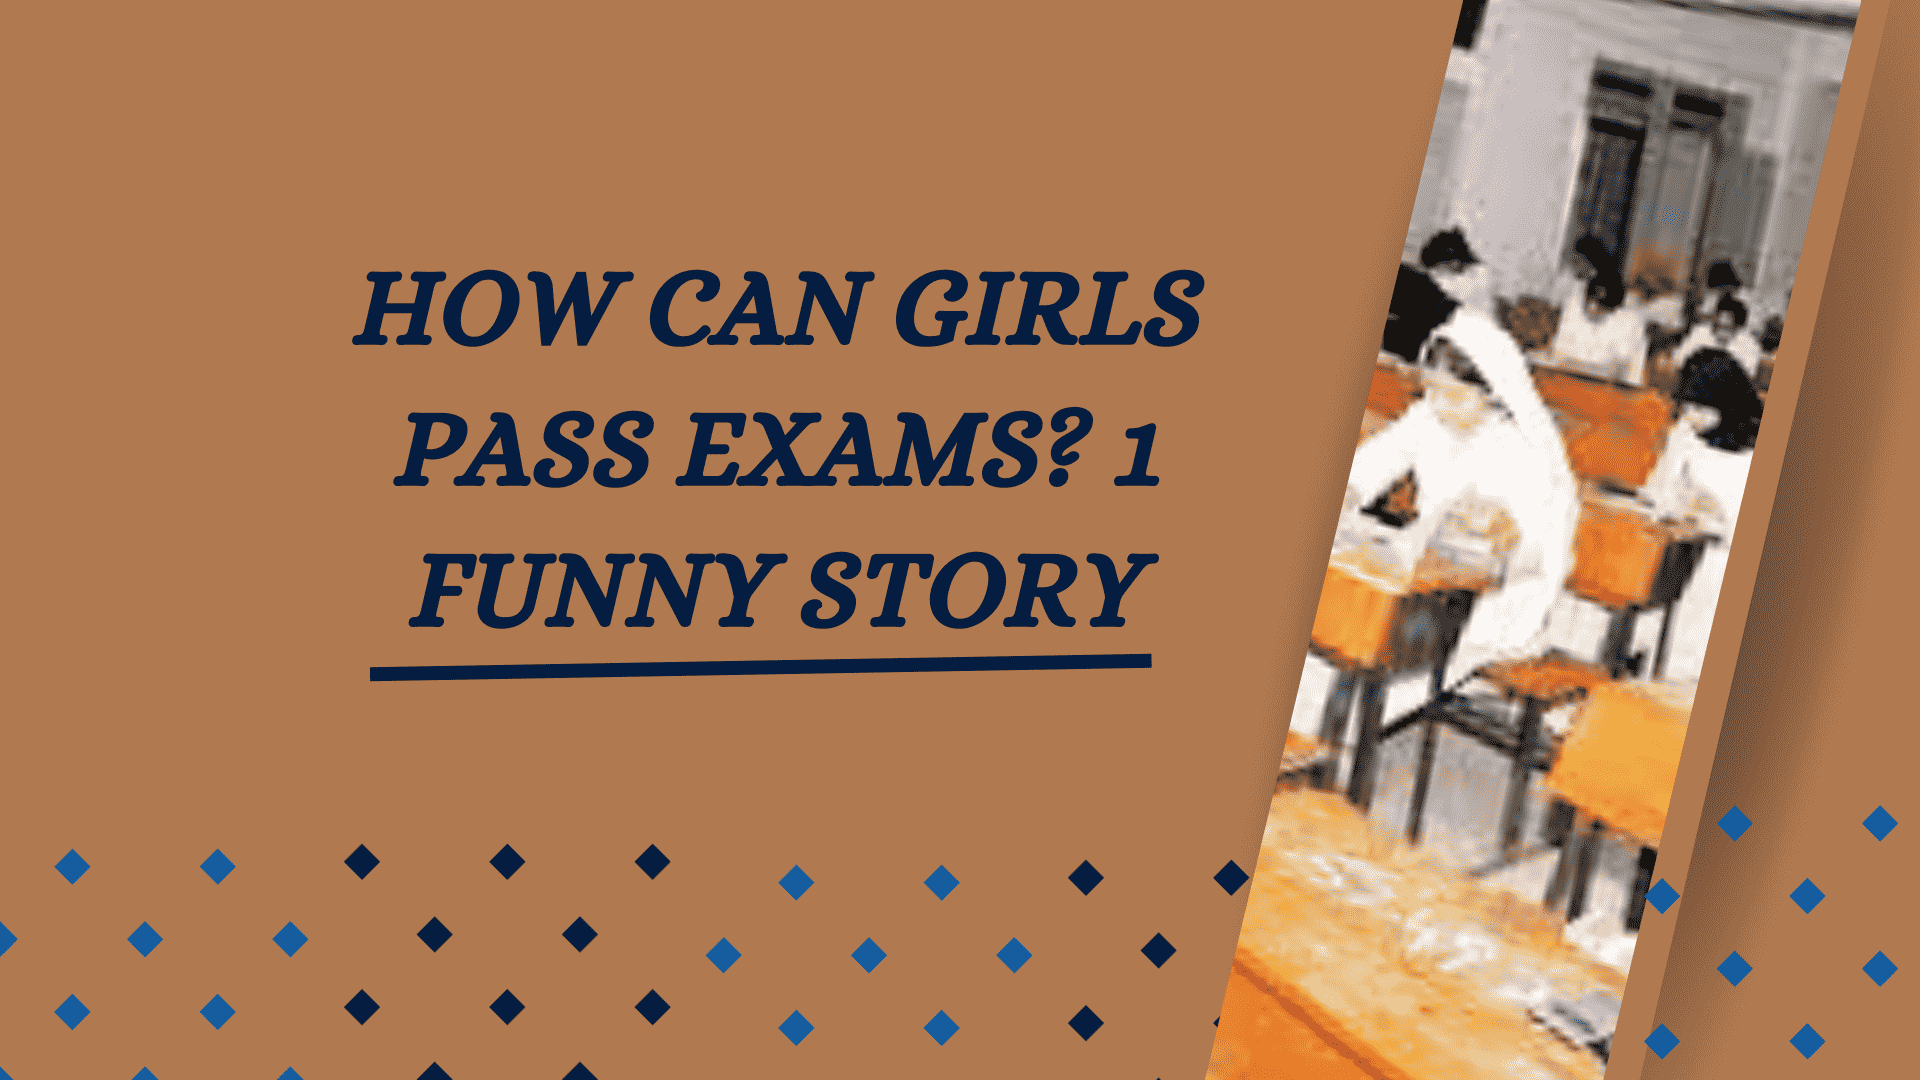 How can girls pass exams? 1 Funny story